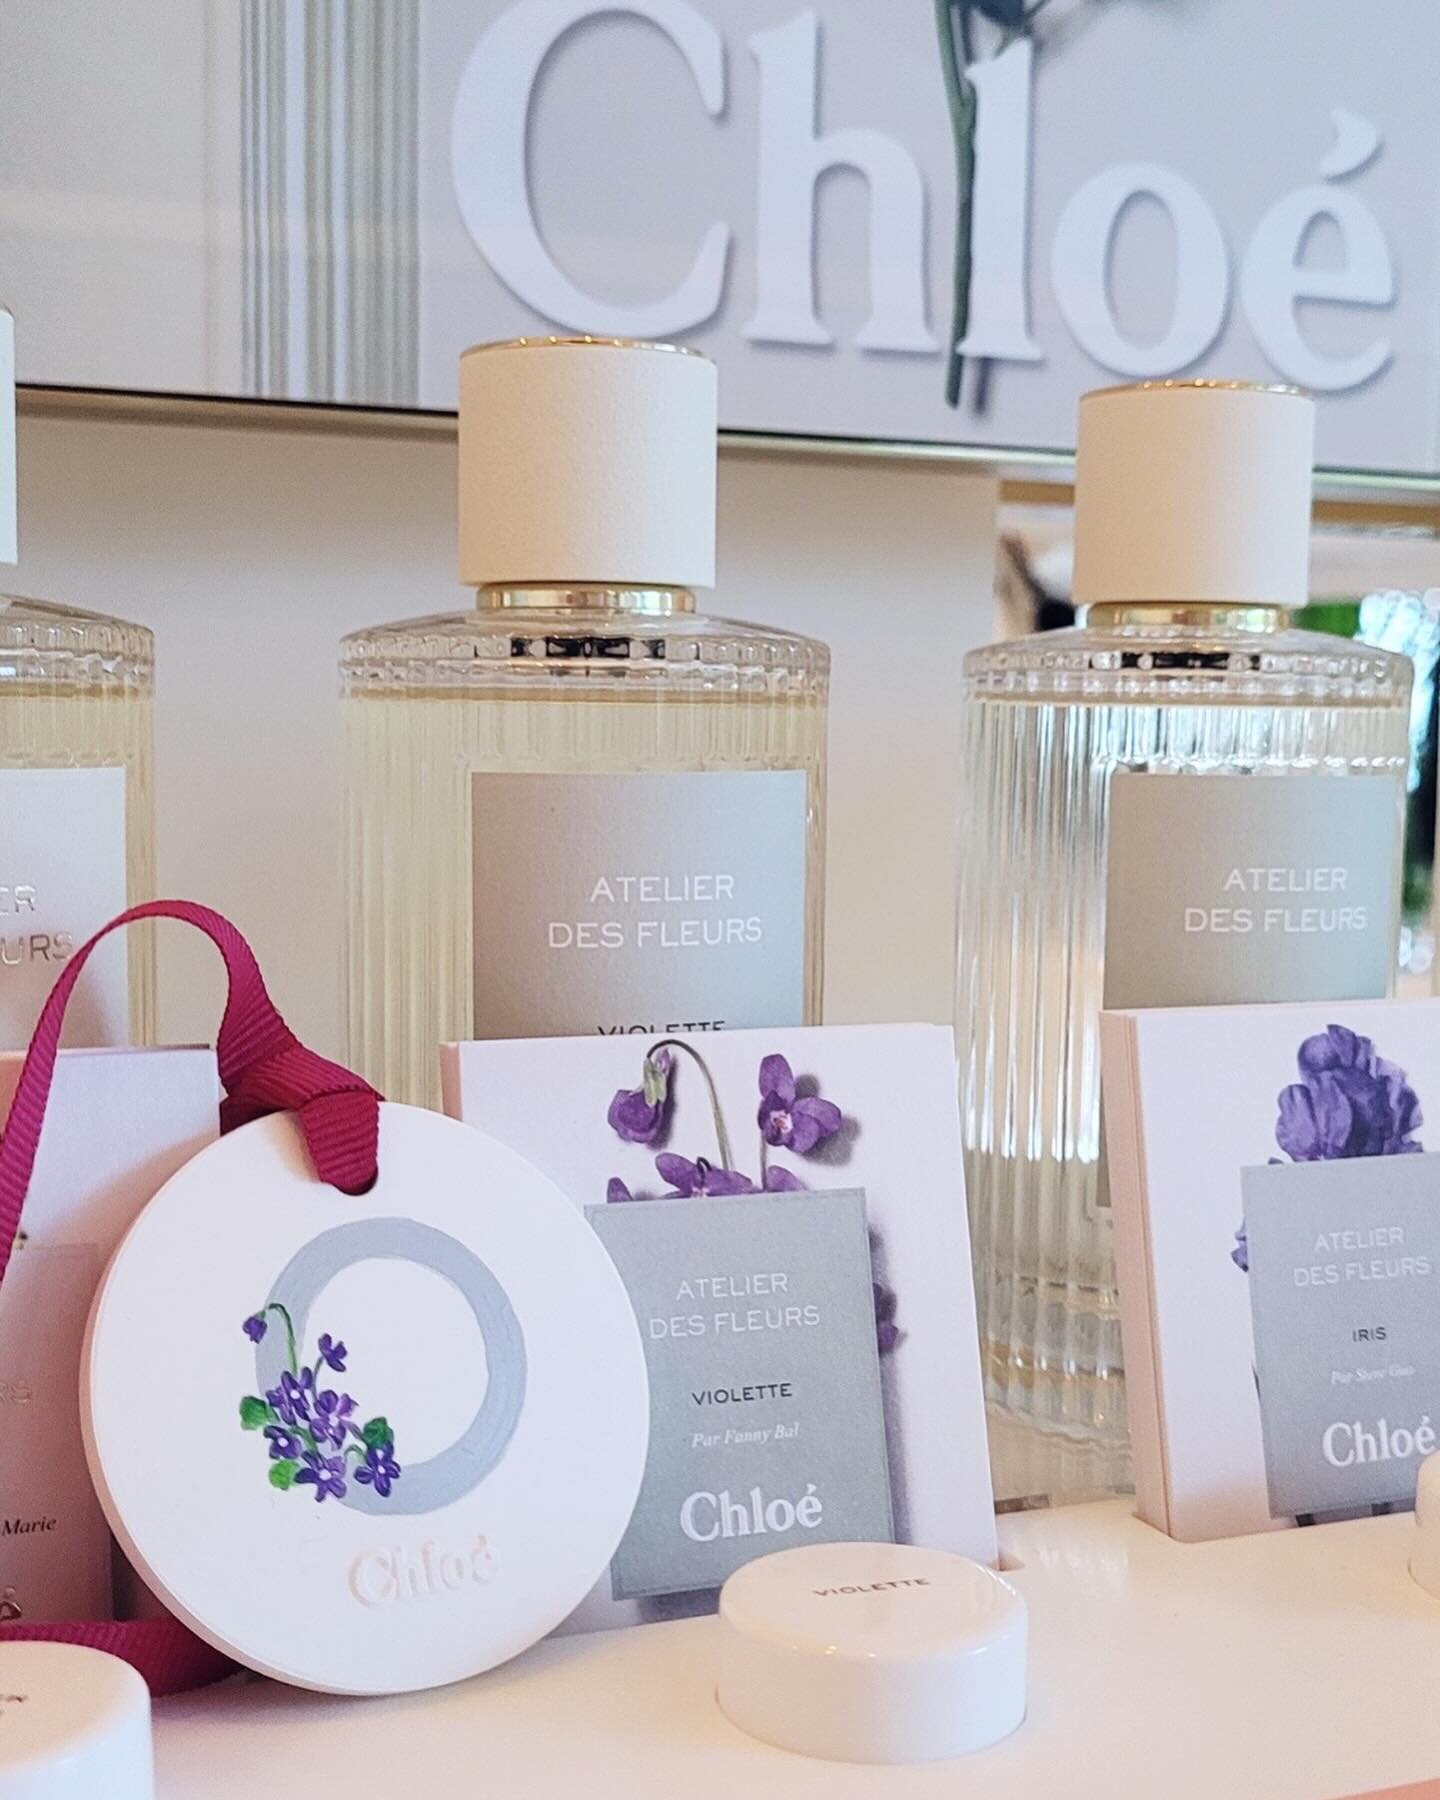 No other job is more DELIGHTFUL than this - painting floral monograms amidst the sweet scents of Spring! 🥰

#ChloeAtelierdesFleurs #Chloe #ChloeSg #DrawAStoryLive #LivePainting #FloralPainting #Eventillustration #eventillustrator #luxuryperfume